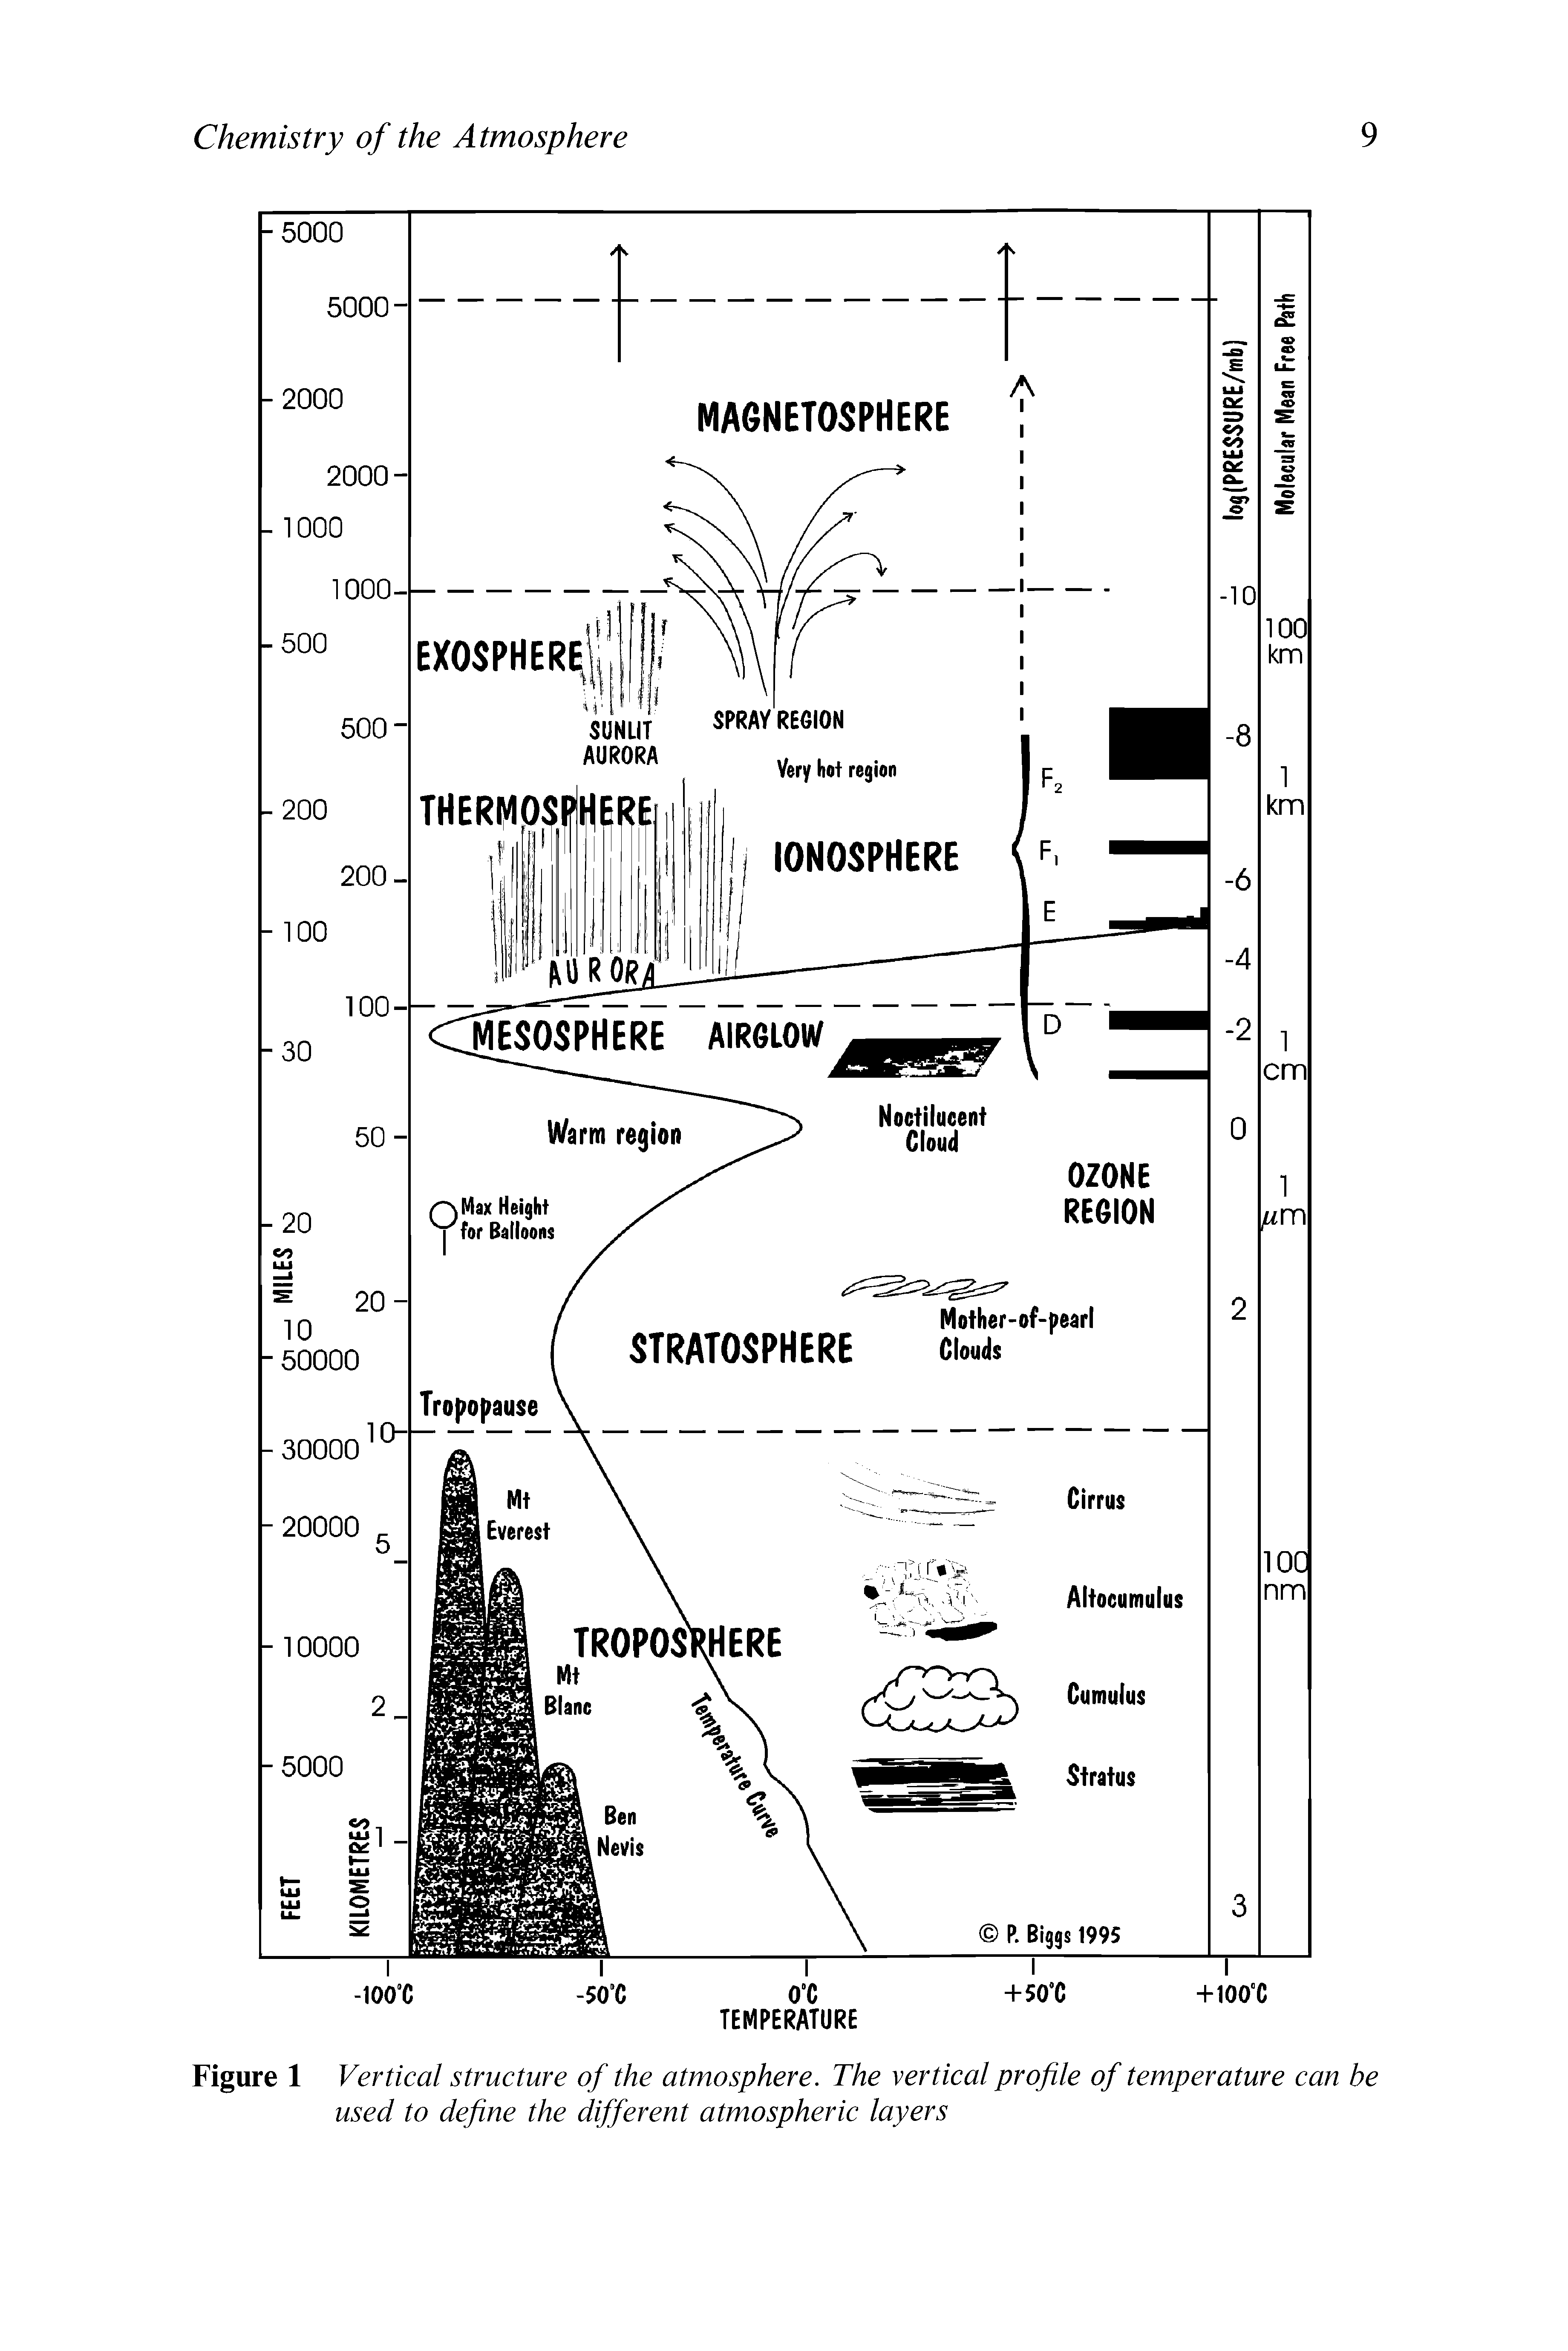 Figure 1 Vertical structure of the atmosphere. The vertical profile of temperature can be used to define the different atmospheric layers...